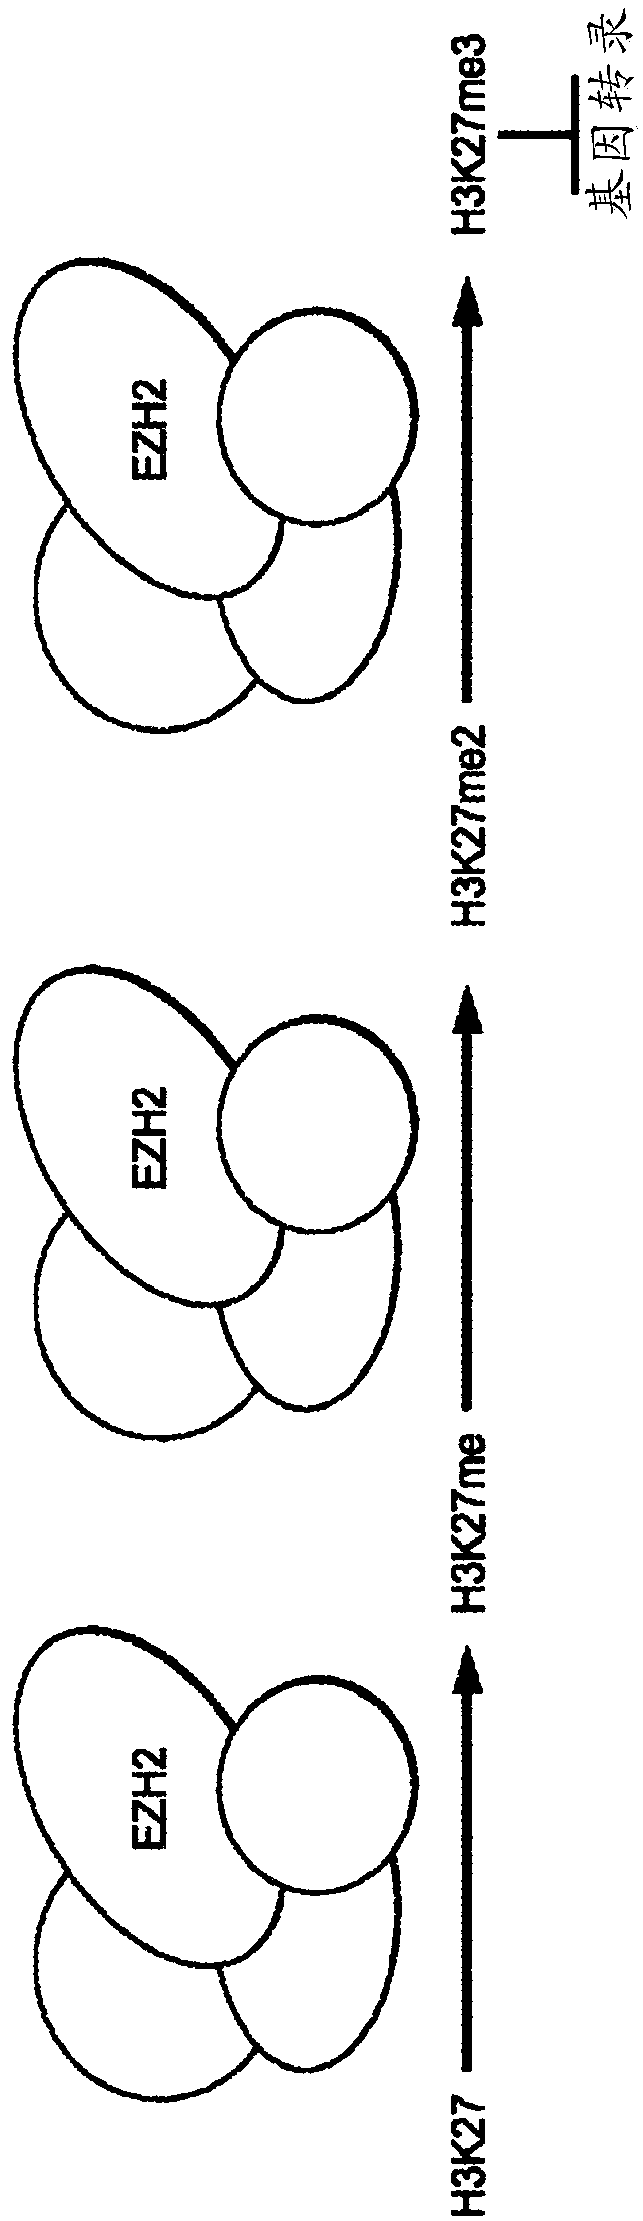 Method of treating malignant rhabdoid tumor of the ovary (MRTO)/small cell cancer of the ovary of the hypercalcemic type (SCCOHT) with an EZH2 inhibitor